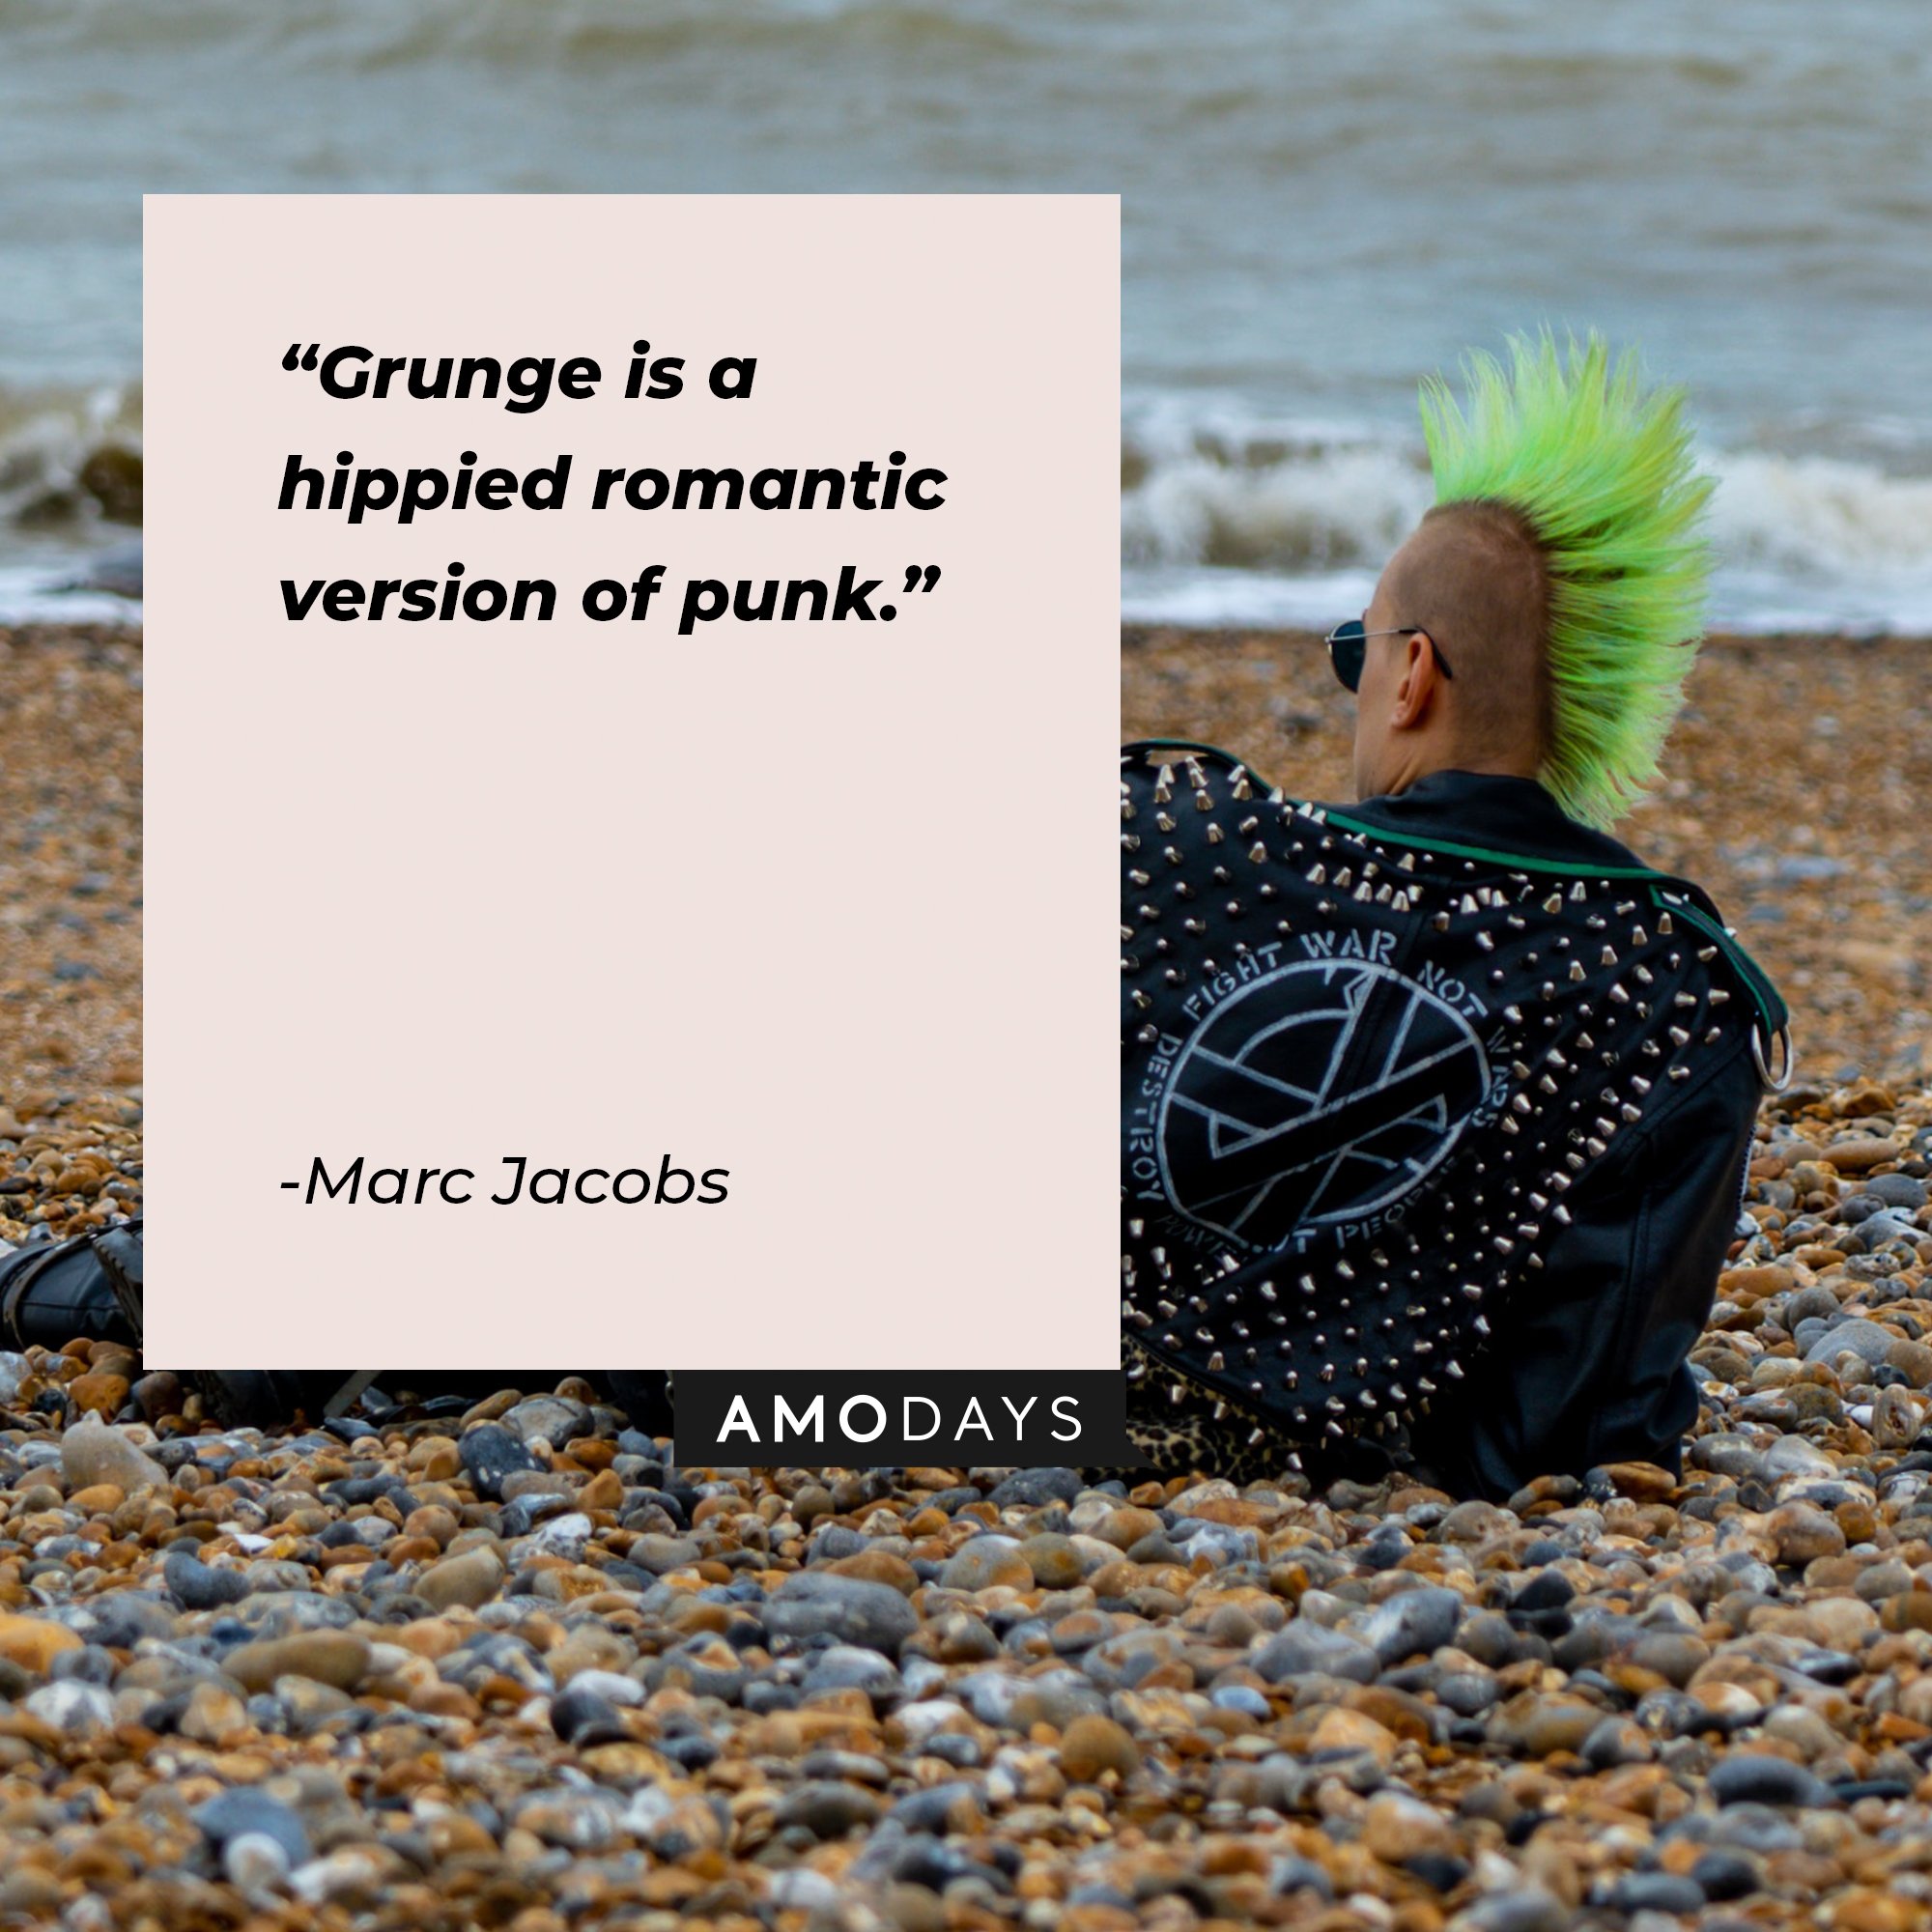 Marc Jacobs’ quote: "Grunge is a hippied romantic version of punk." | Image: AmoDays